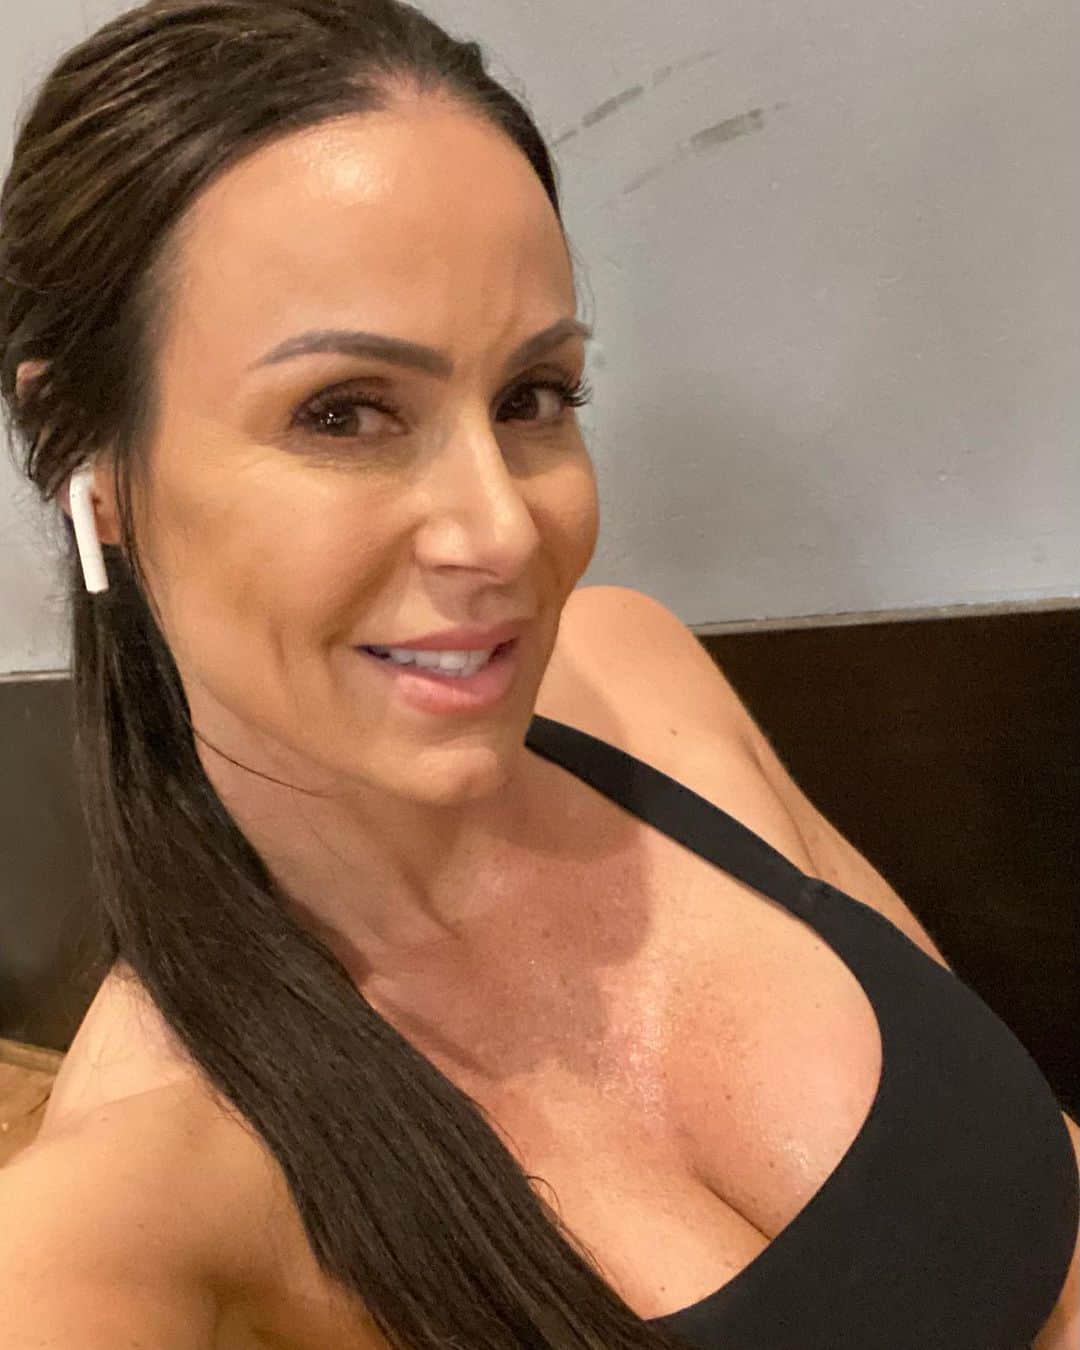 deanna daughtry recommends Kendra Lust No Makeup